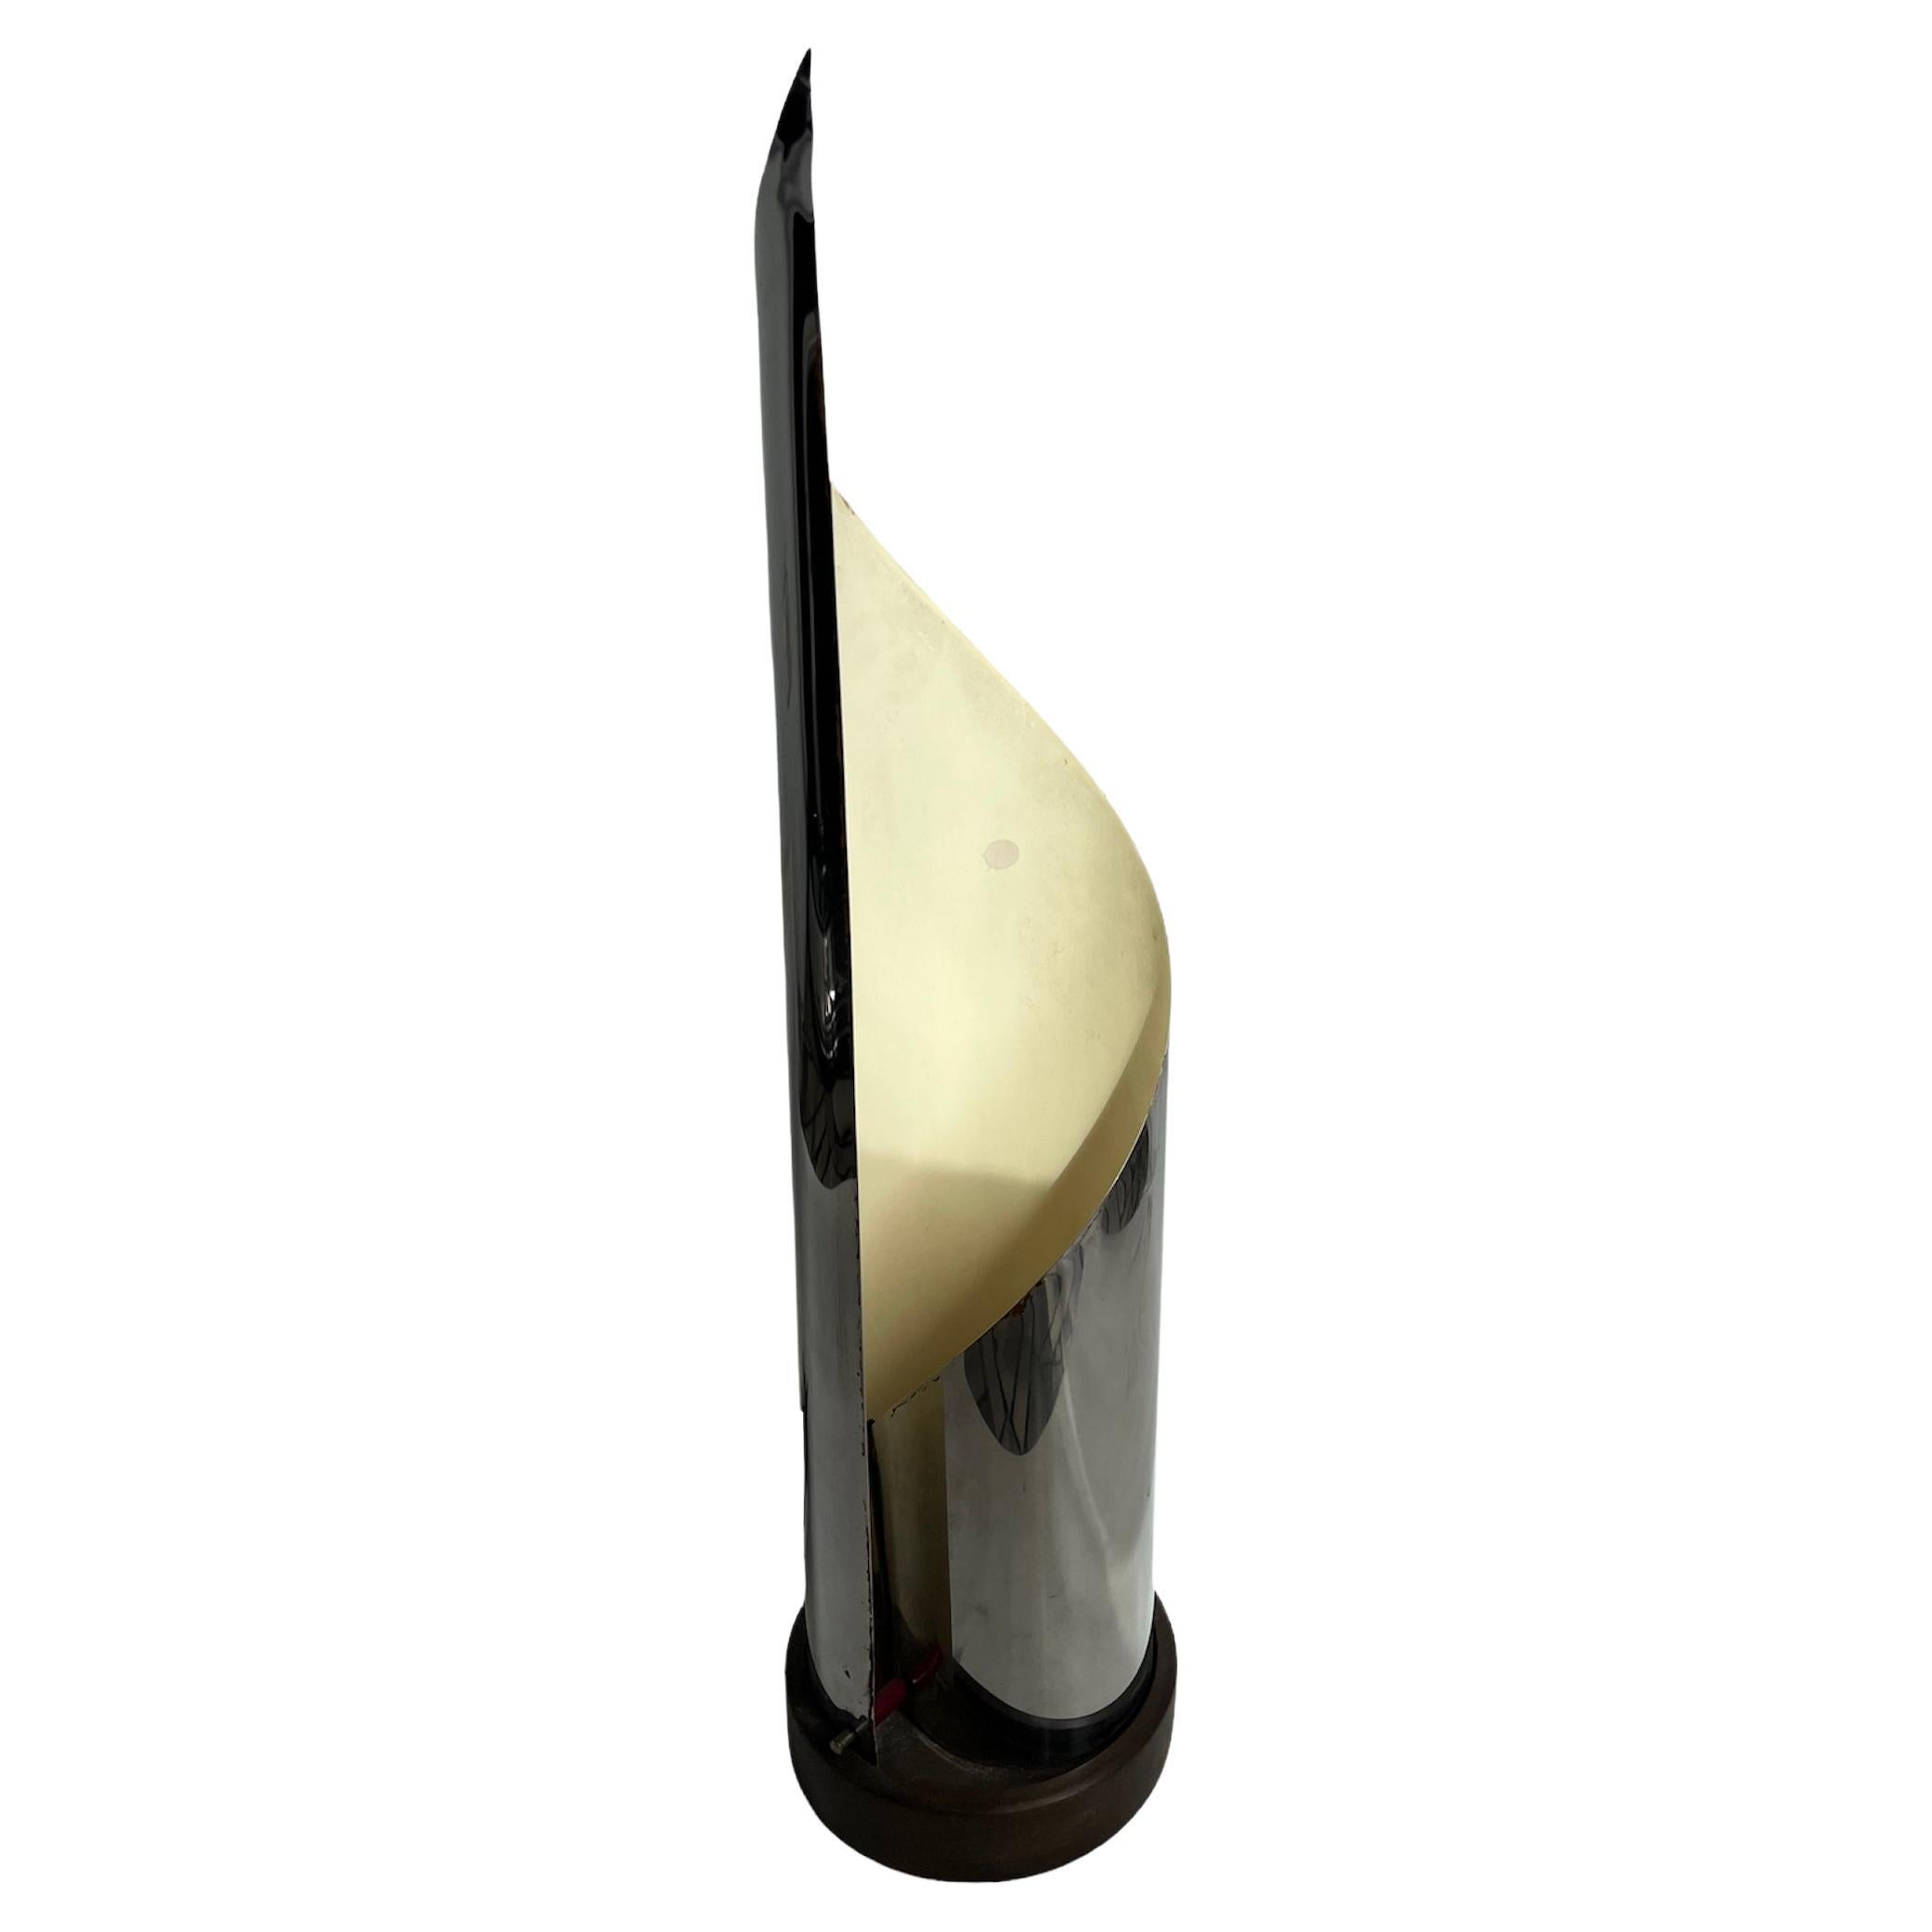 Big Table Lamp, 1970, Material: Chrome, France Attributed to Bended Brushed For Sale